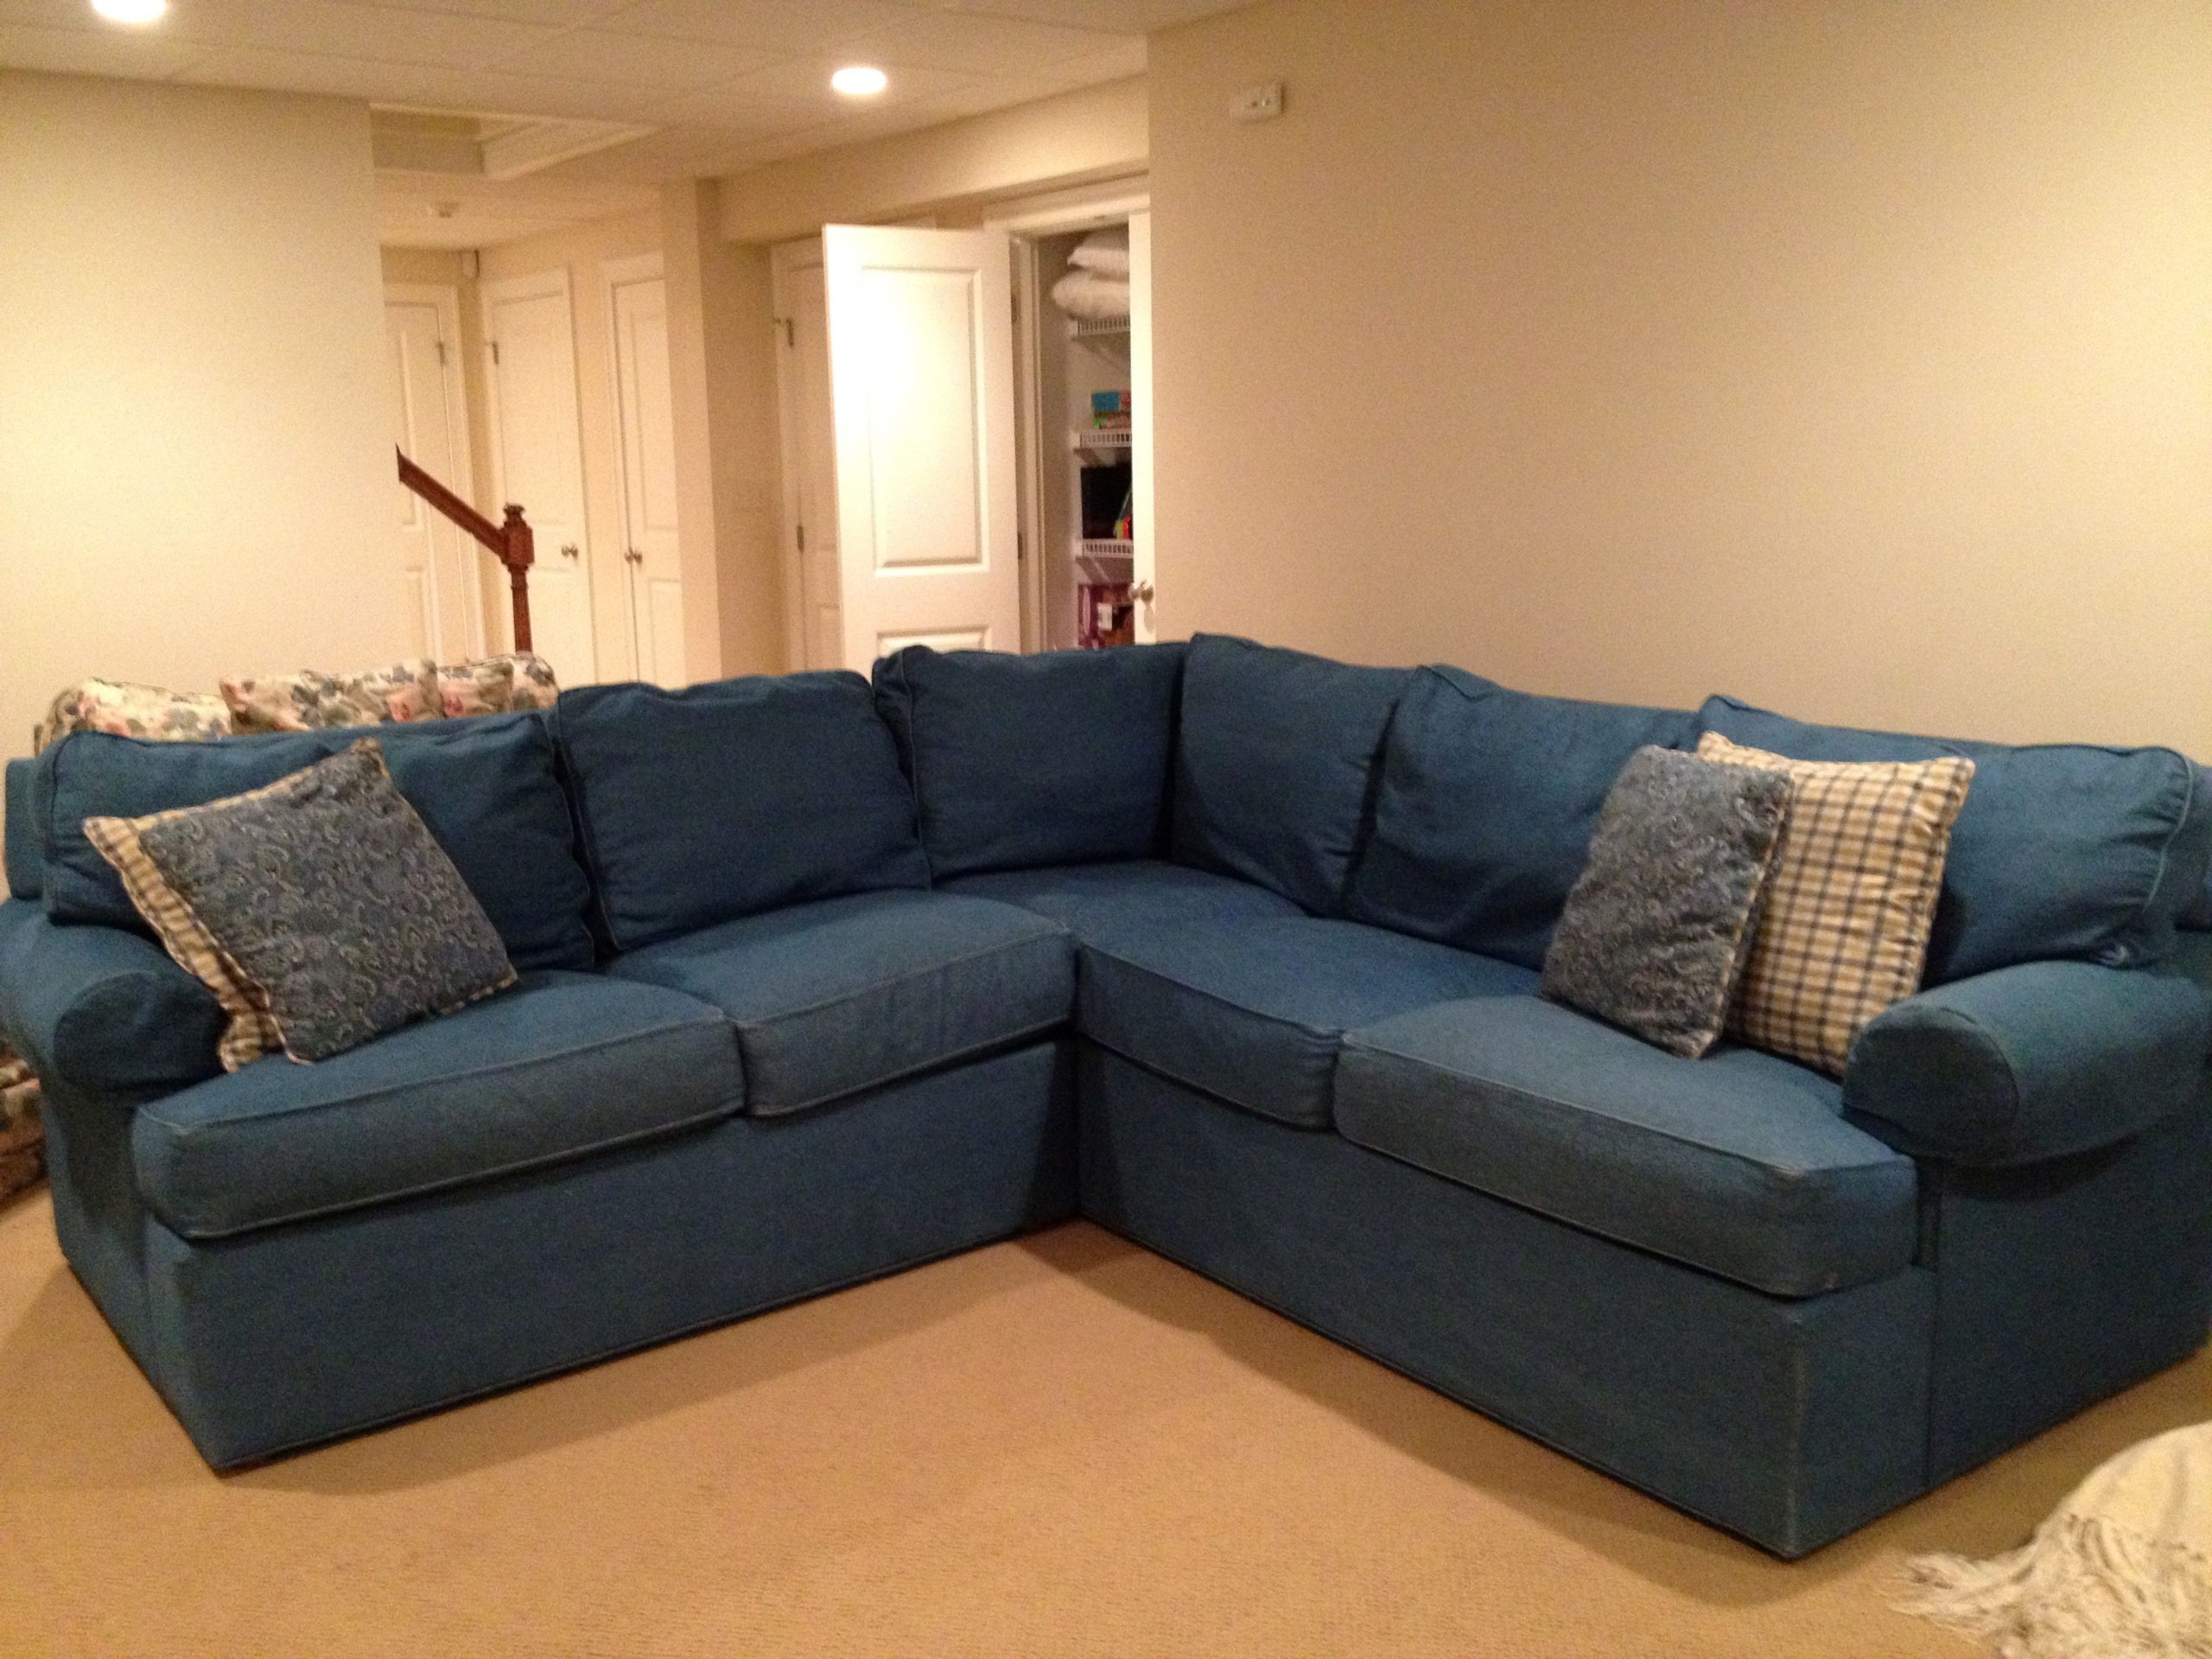 Denim sectional couch